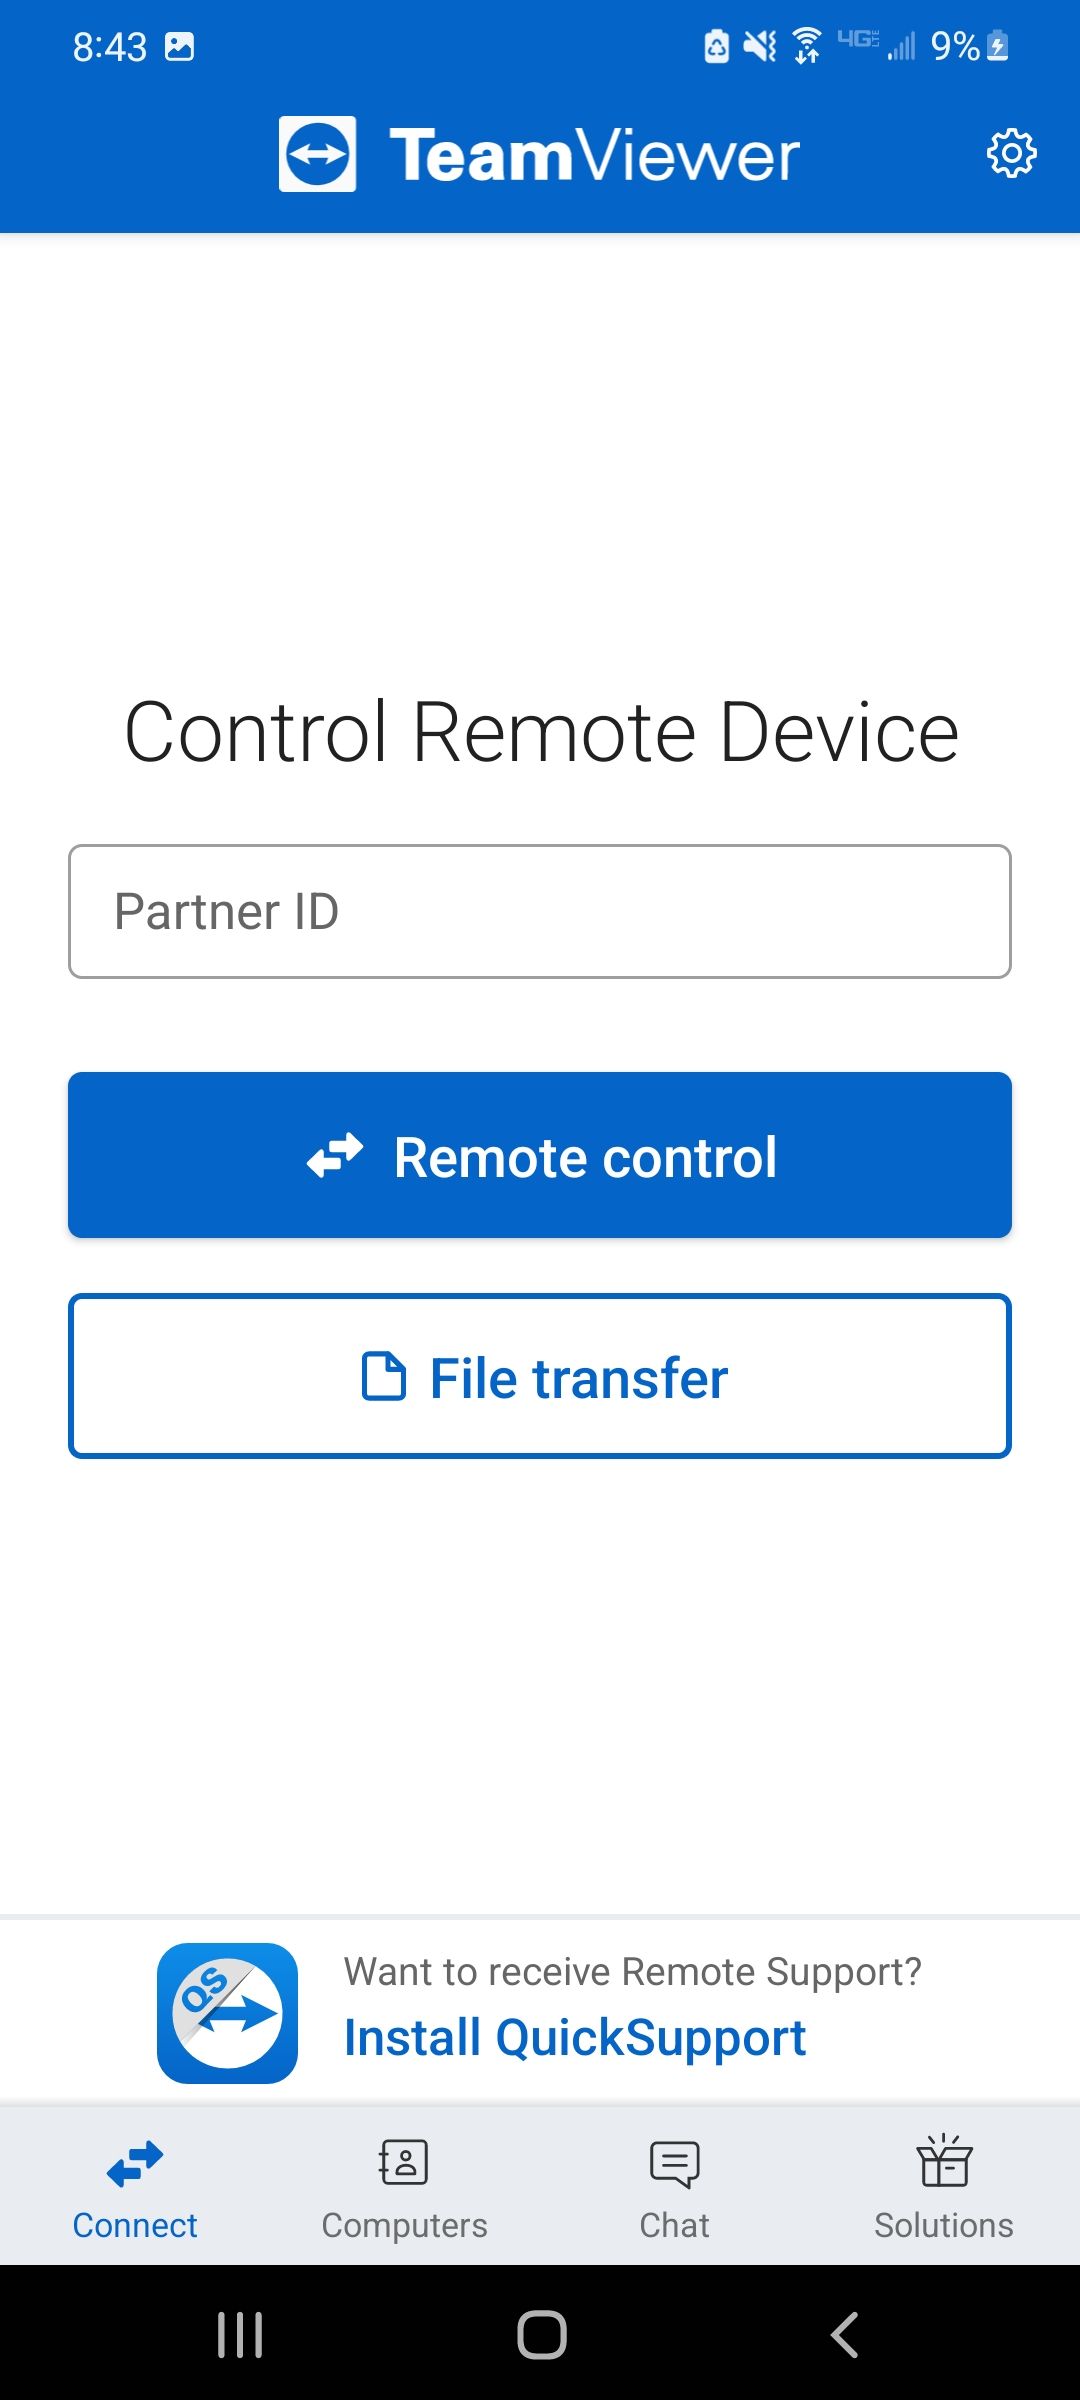 TeamViewer Remote Control menu, requesting an ID for connection.